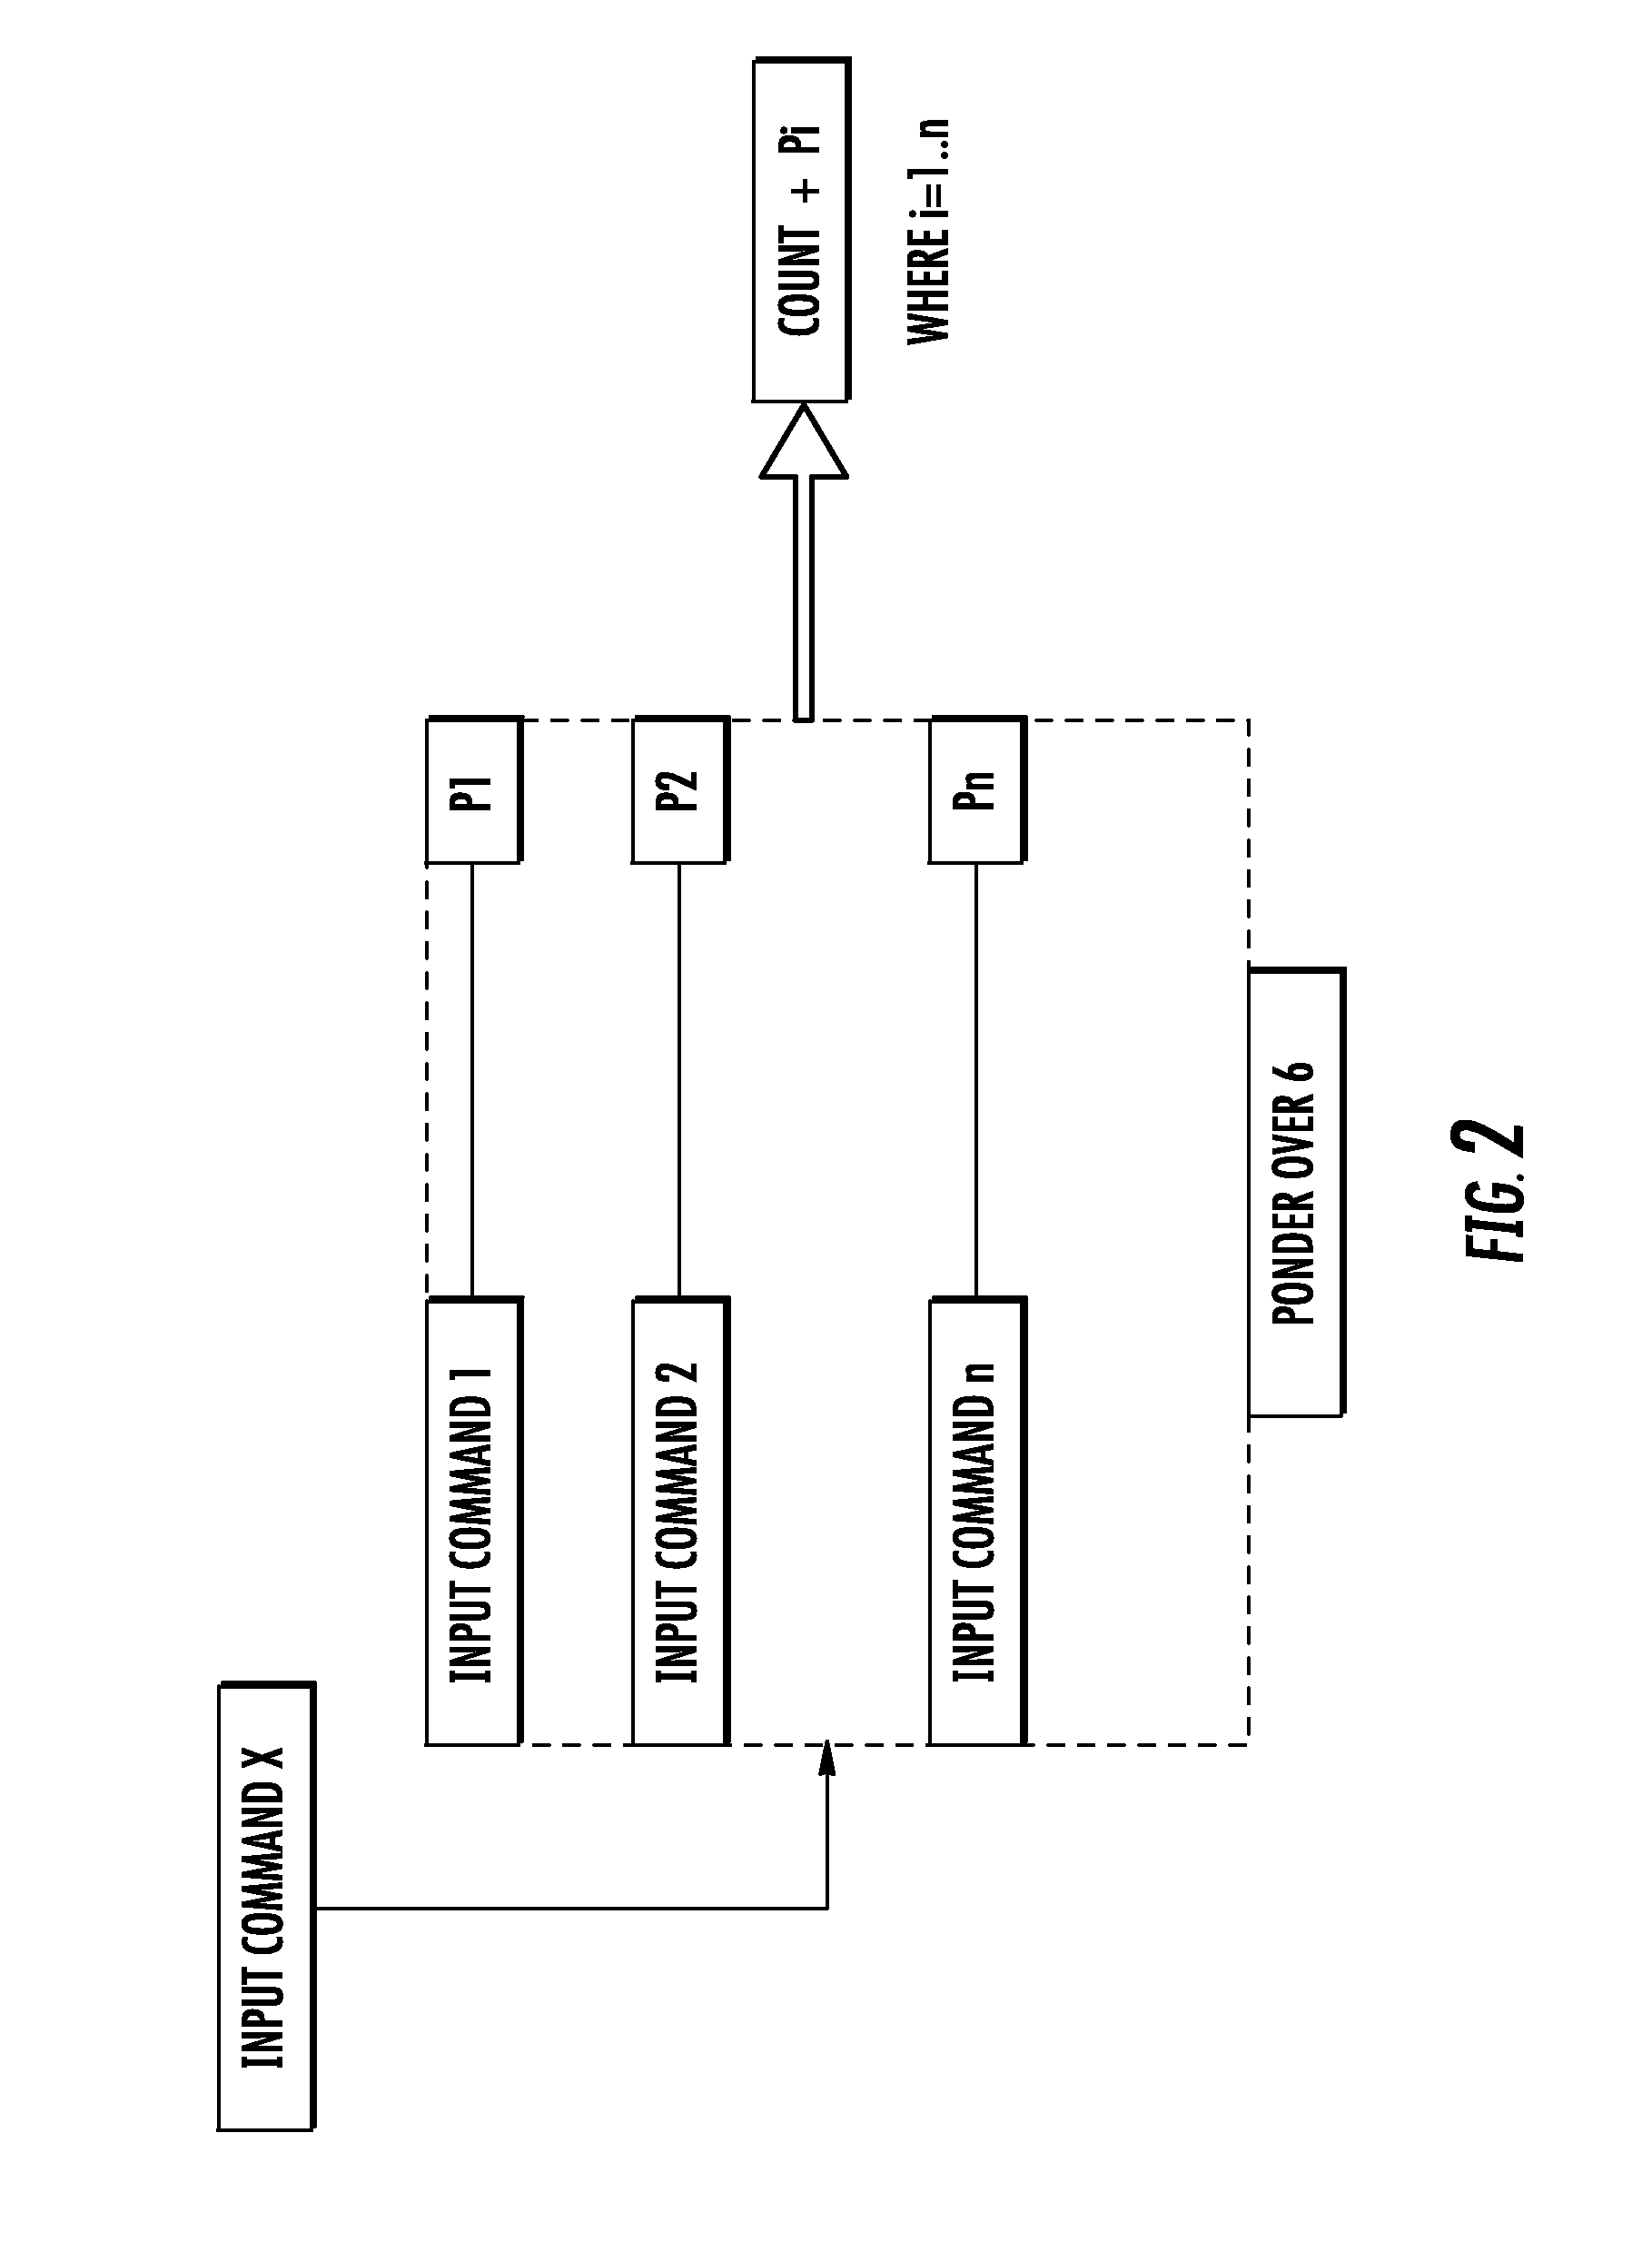 Method for detecting and reacting against possible attack to security enforcing operation performed by a cryptographic token or card